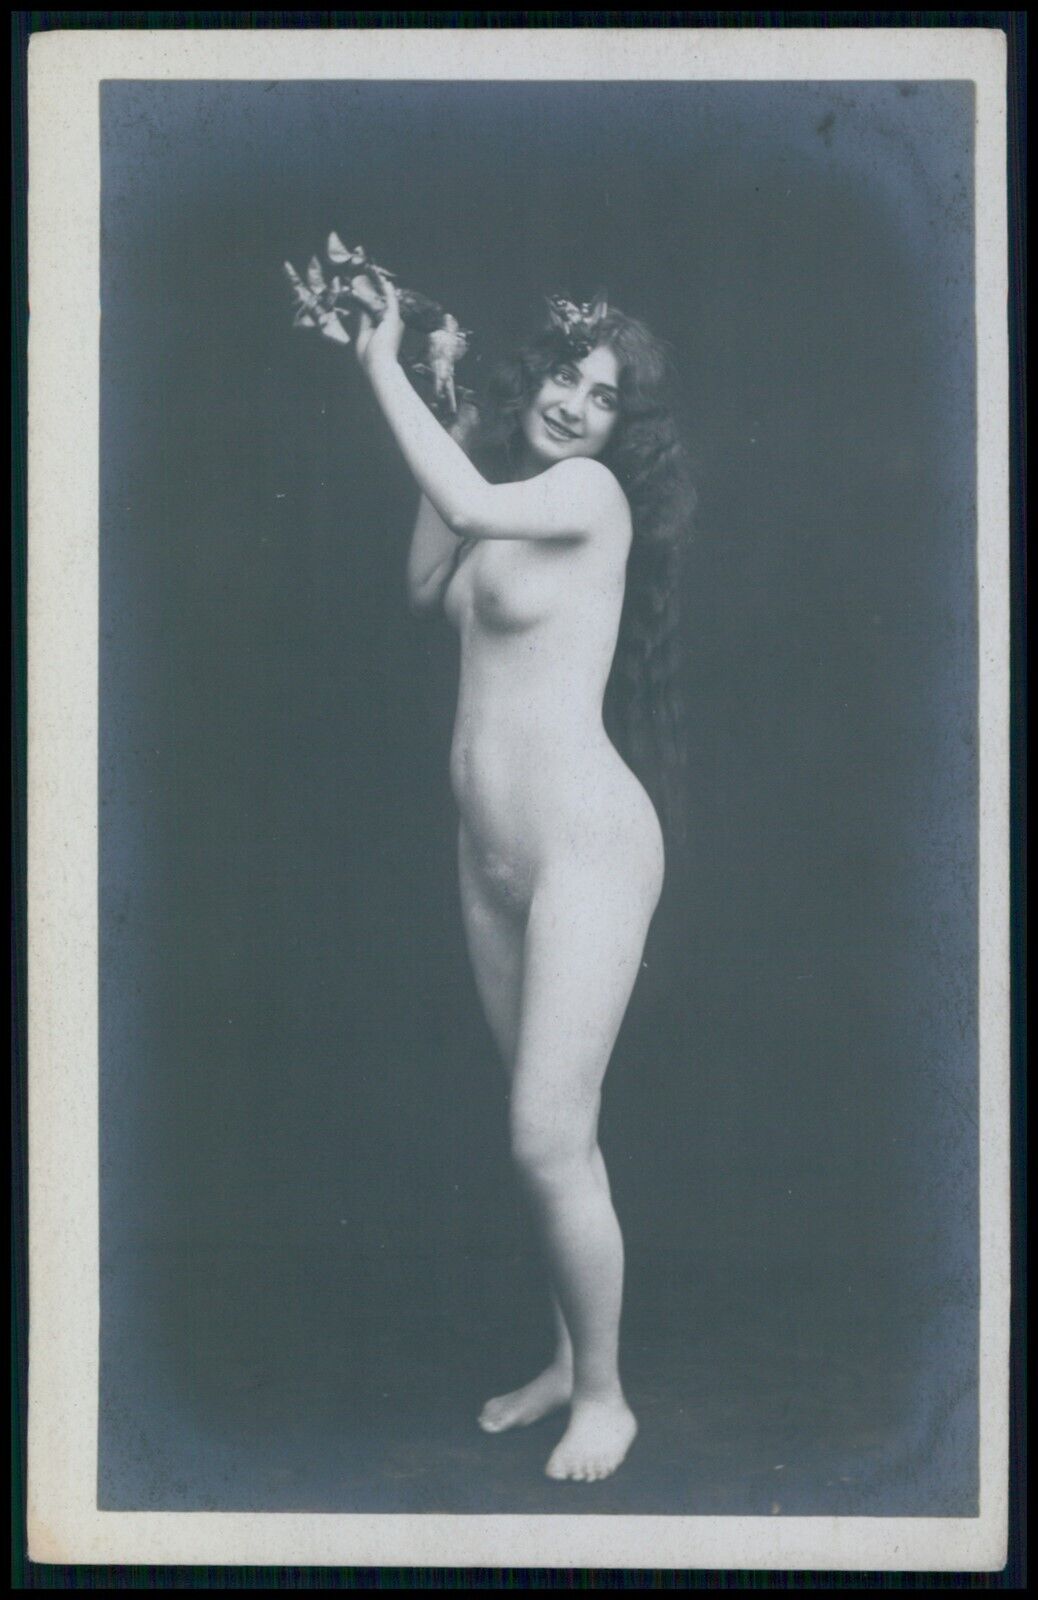 French full nude woman Long hair hairdo original old early 1900s photo postcard